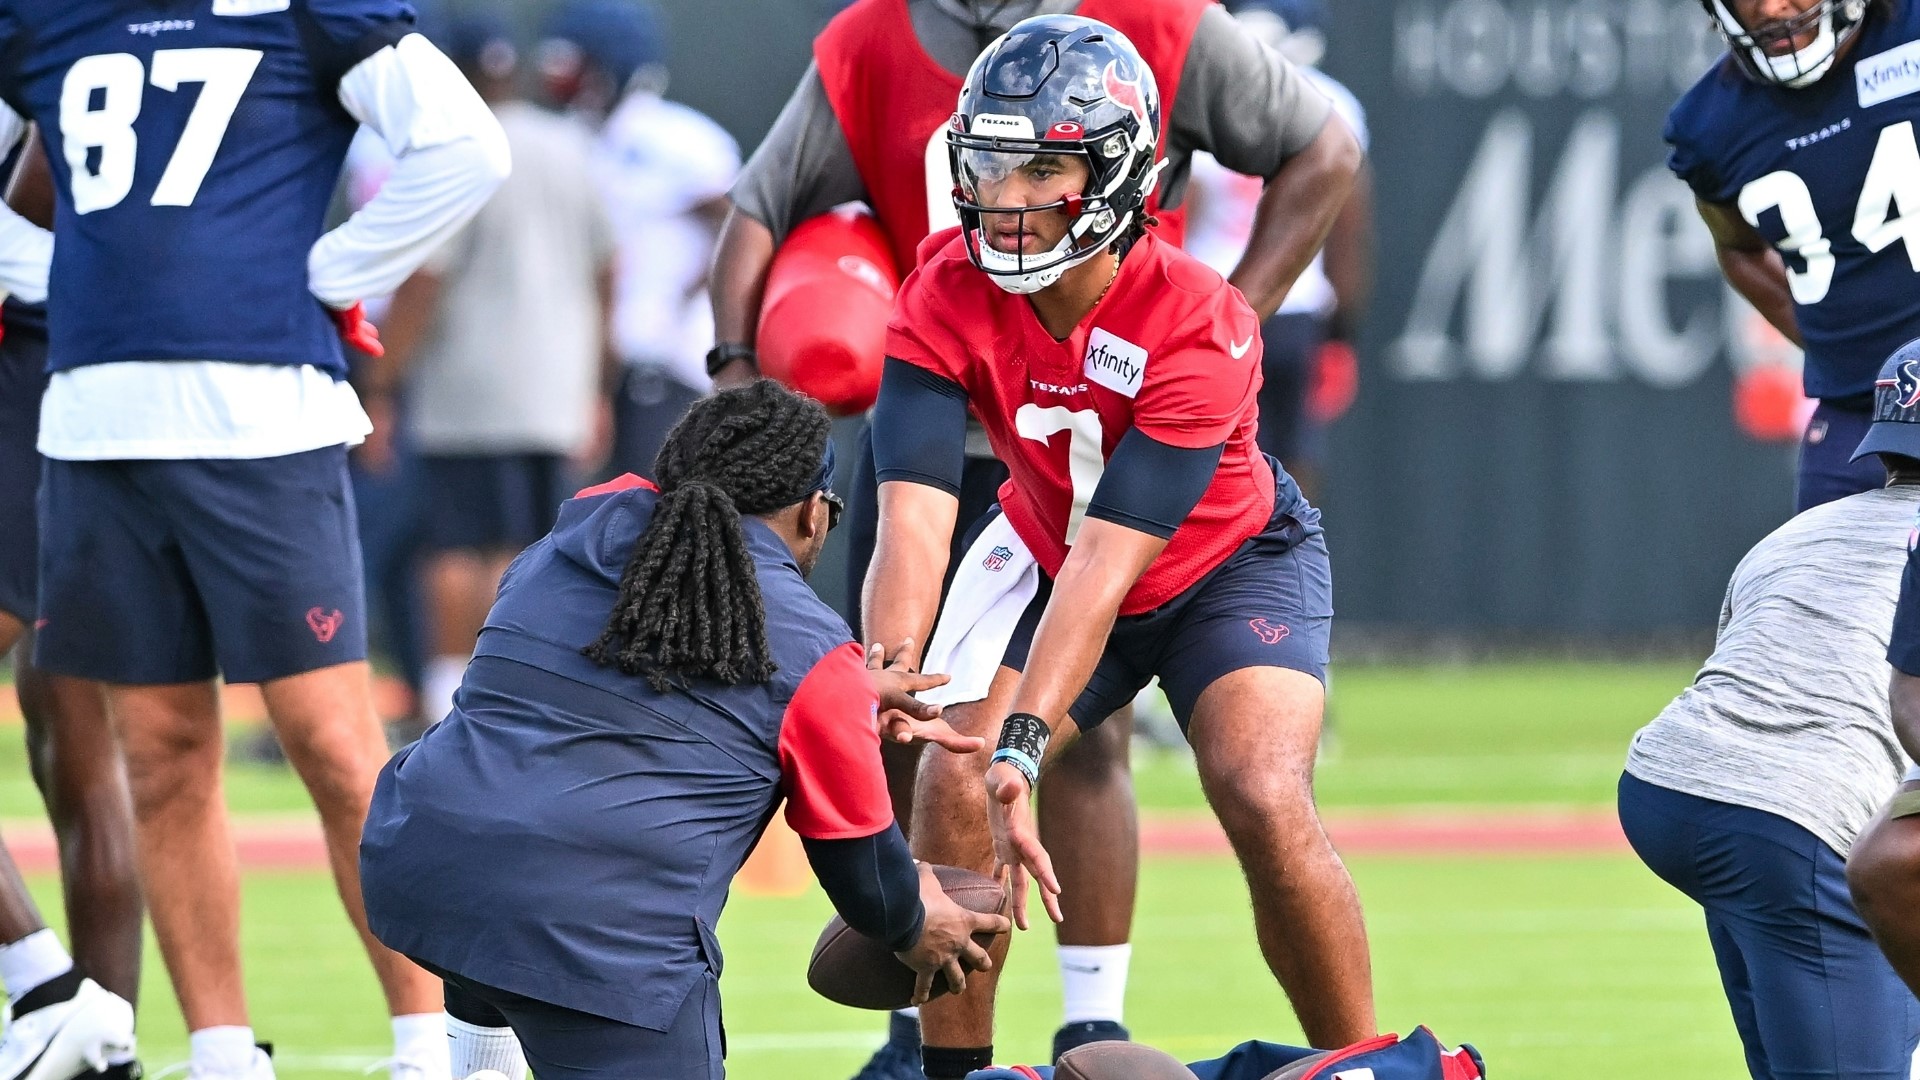 There's excitement in camp as the Houston Texans get ready for the season with a new coach and plenty of promise.